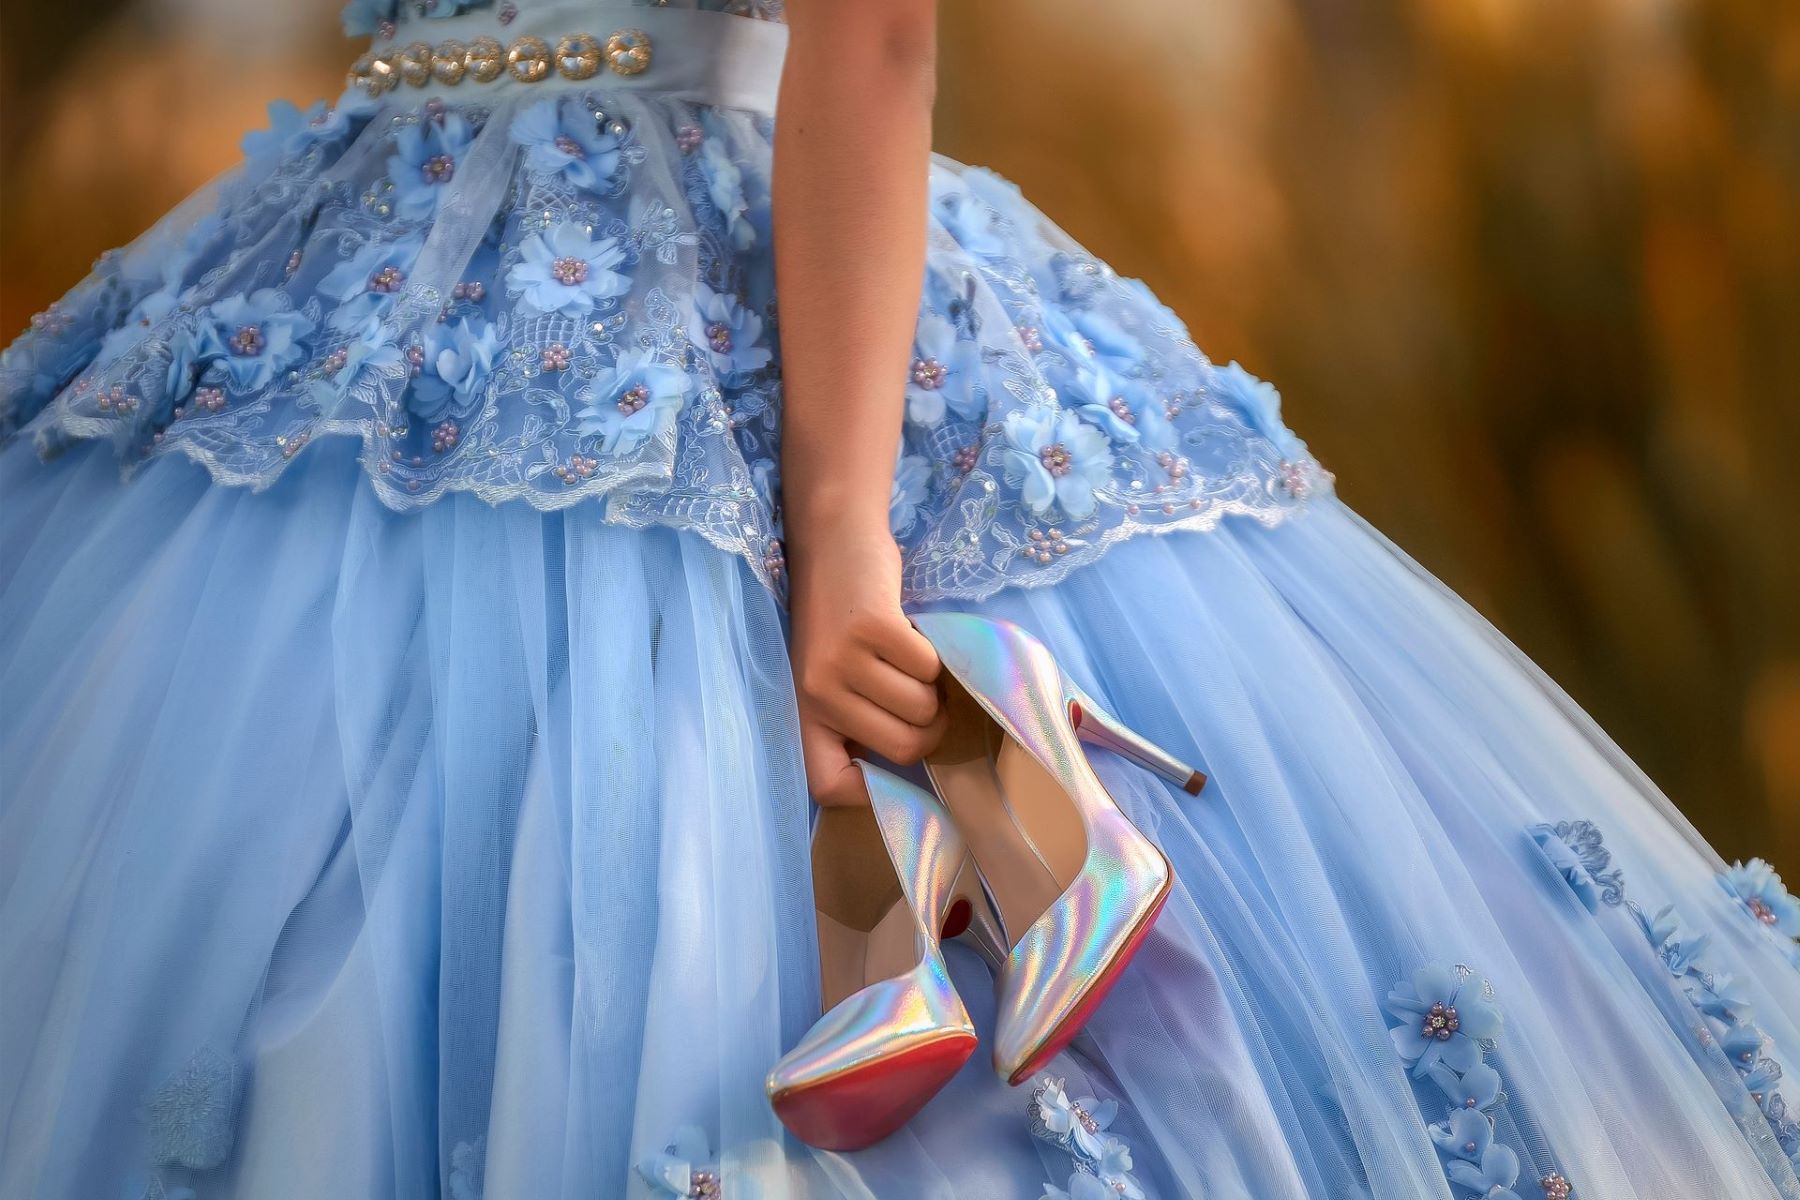 Wearing A Quinceañera-Style Dress For My Sweet 16: Potential Conflicts And Considerations